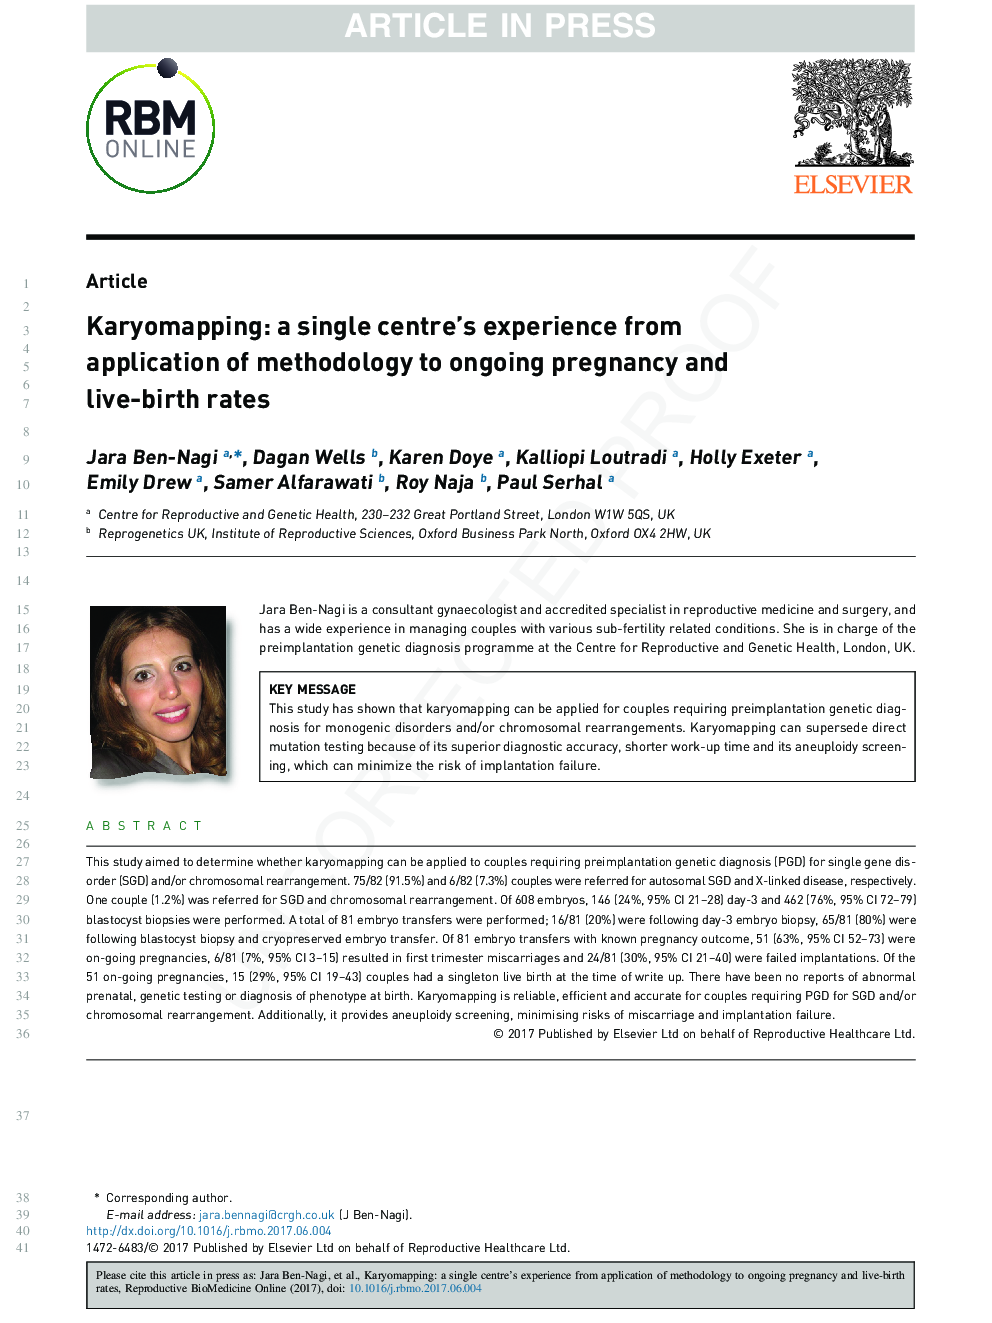 Karyomapping: a single centre's experience from application of methodology to ongoing pregnancy and live-birth rates